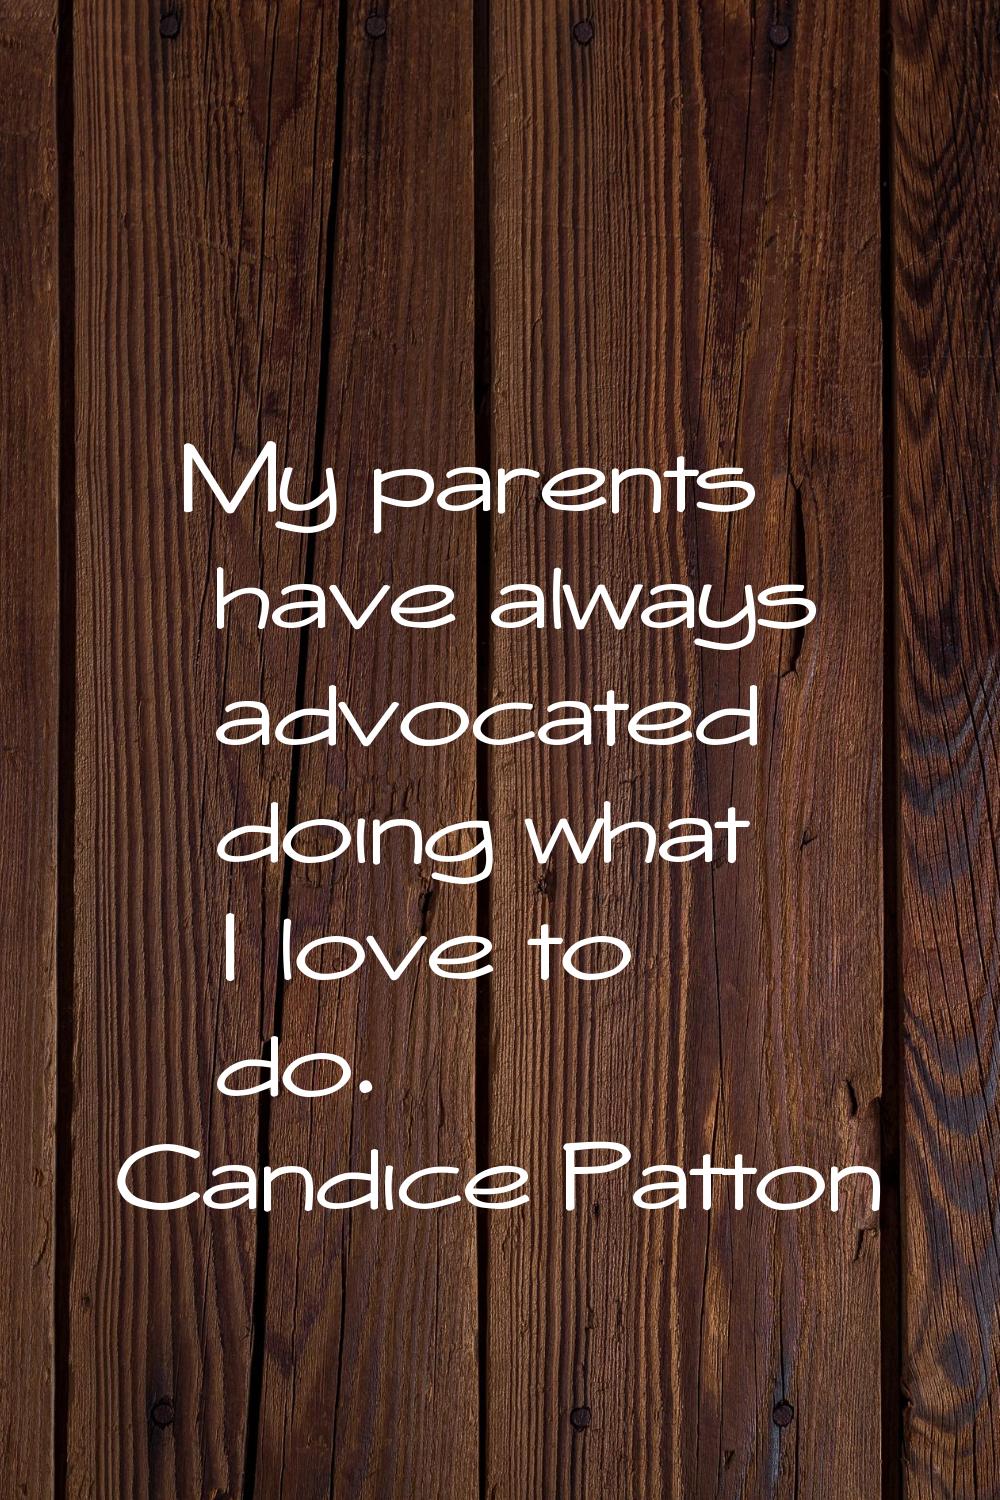 My parents have always advocated doing what I love to do.